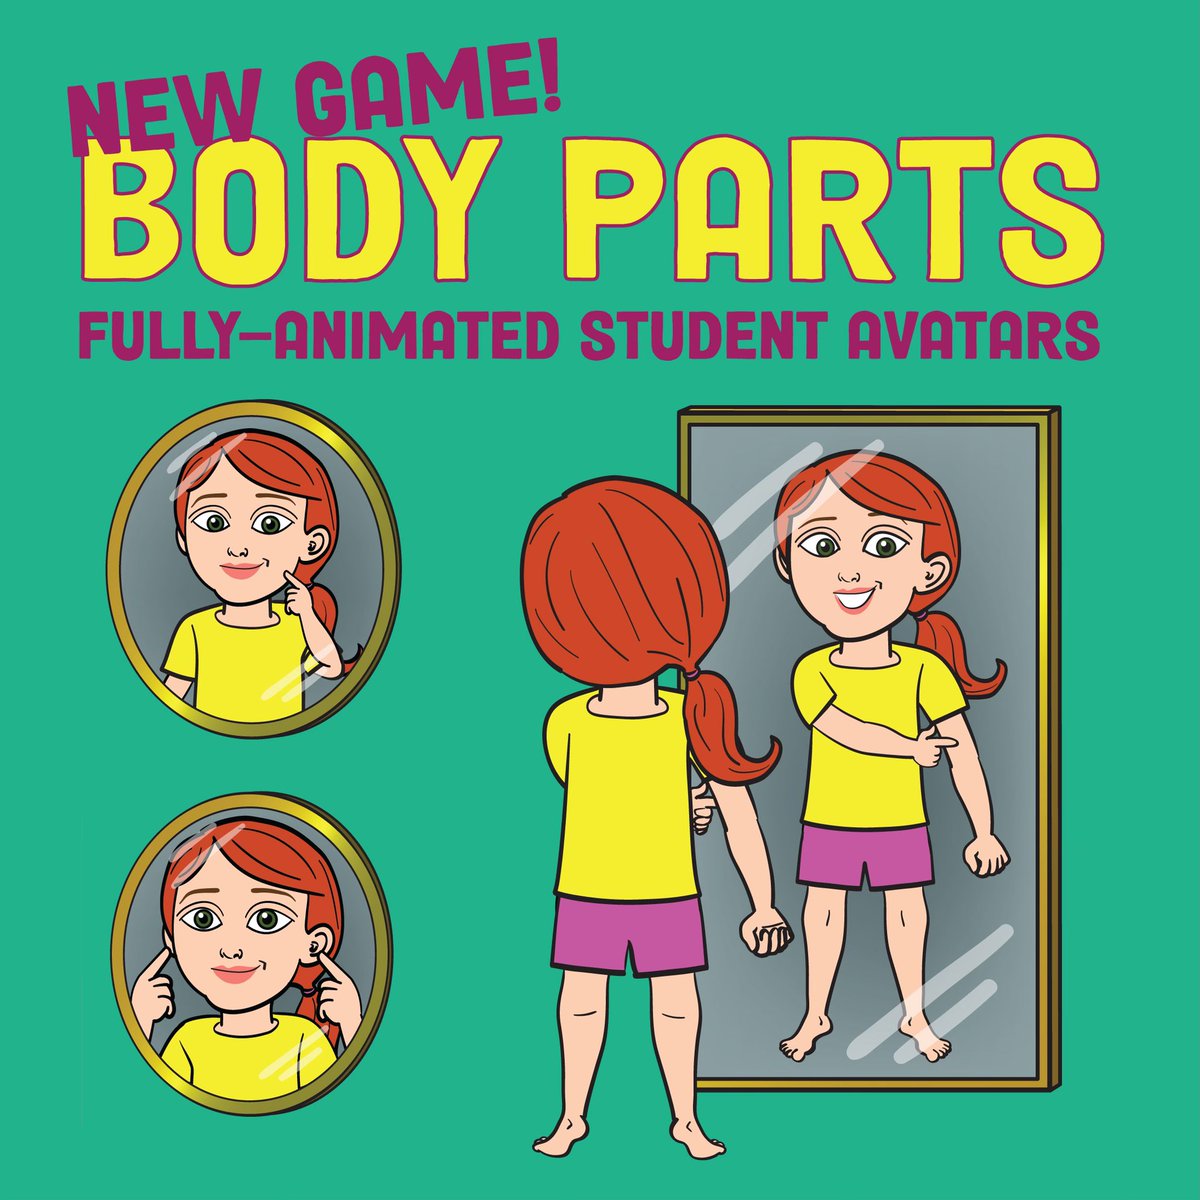 Now, children can learn how to identify various parts of their bodies using a fully animated avatar created in their own likeness.

#speechkingdom #specialeducation #spedteachers #autism #ASD #speechtherapy #socialstories #SLP #ADHD #socialcommunication #apraxia #appsforautism